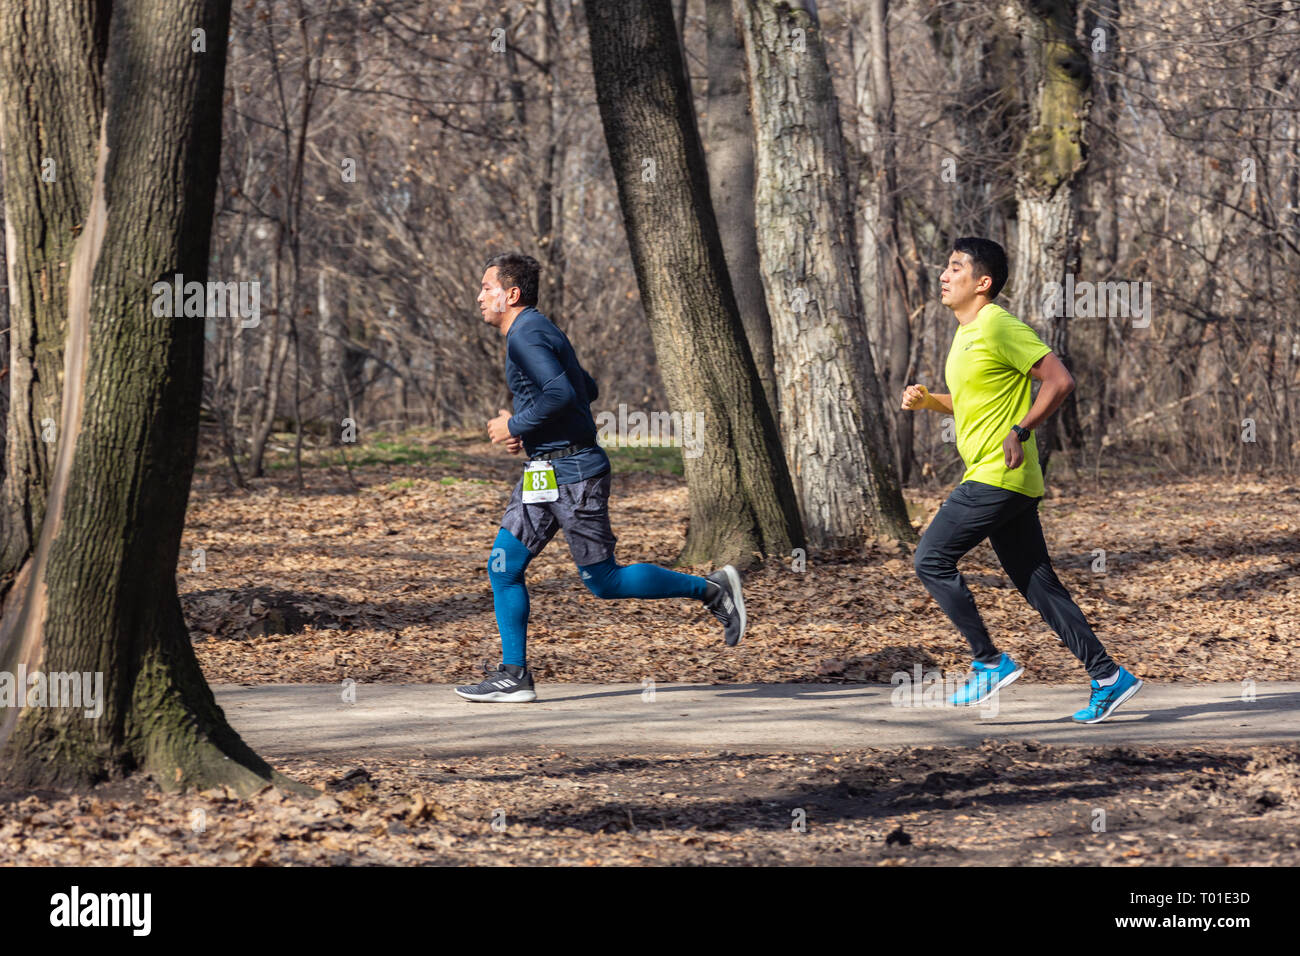 ALMATY KAZAKHSTAN - MARCH 16 2019: An unidentified man runs through a grove during the spring marathon in the city of Almaty, in a grove named after Stock Photo